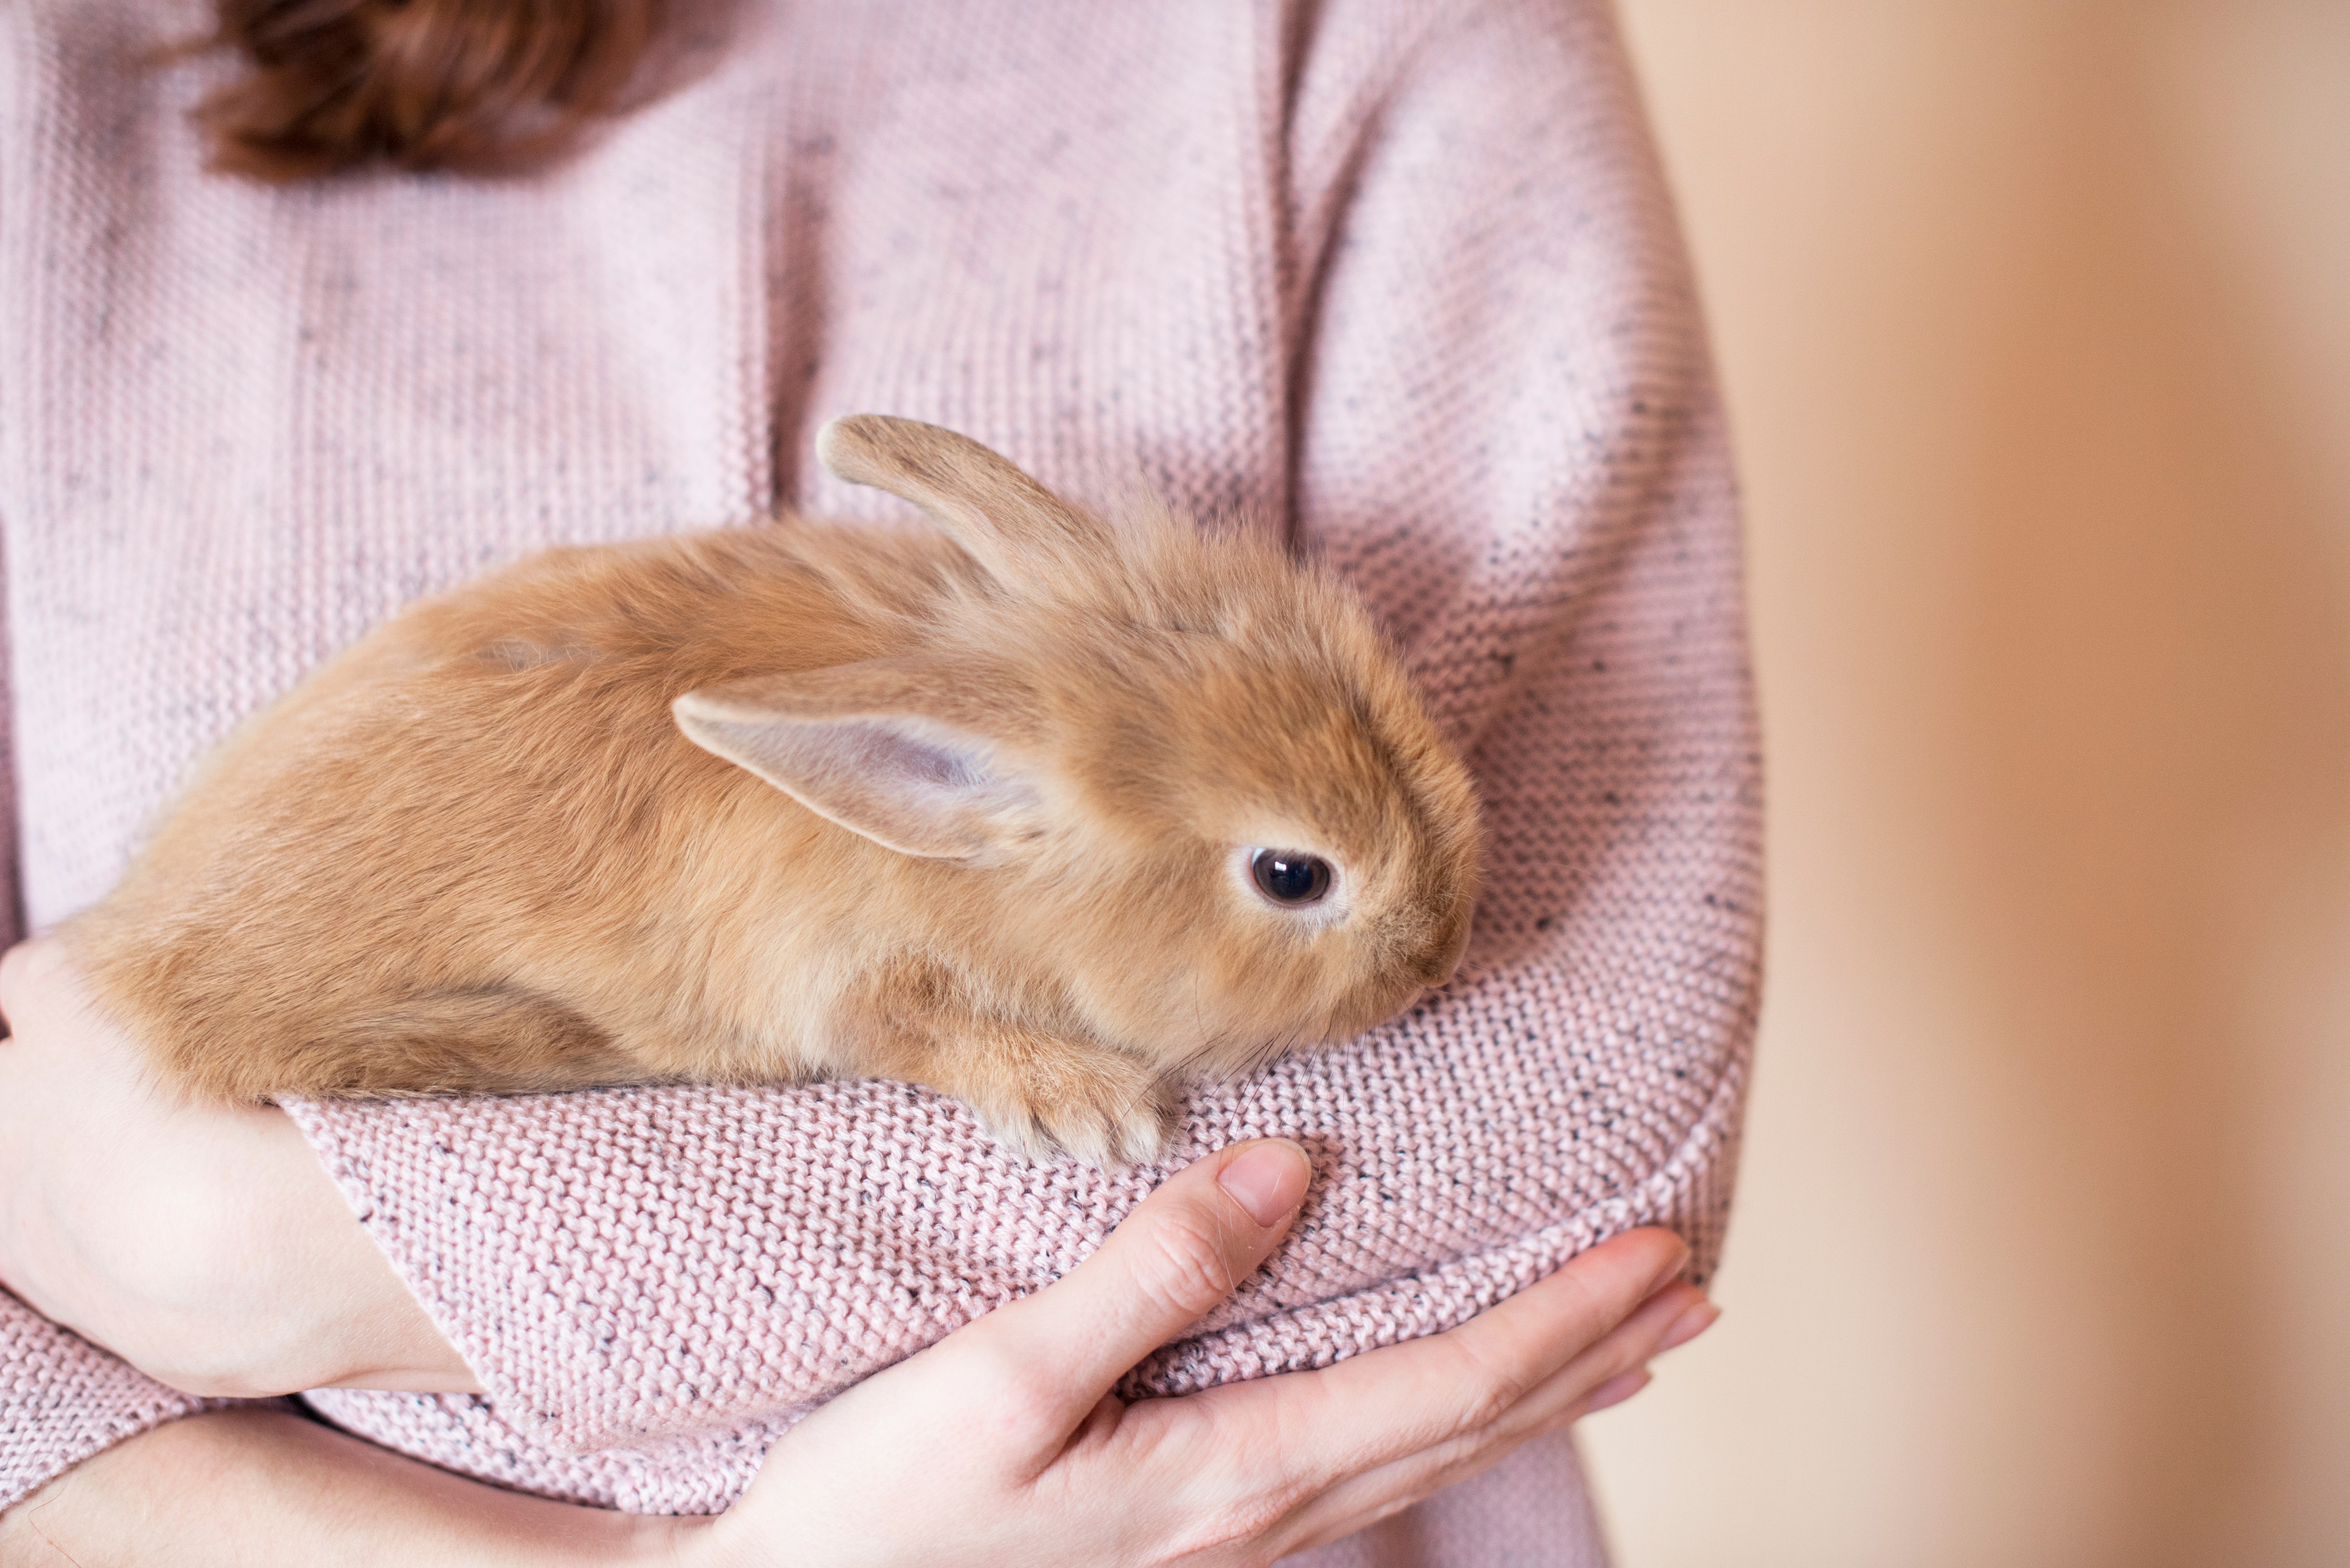 Bunny Huggers - The Ins and Outs of Keeping Rabbits as Pets